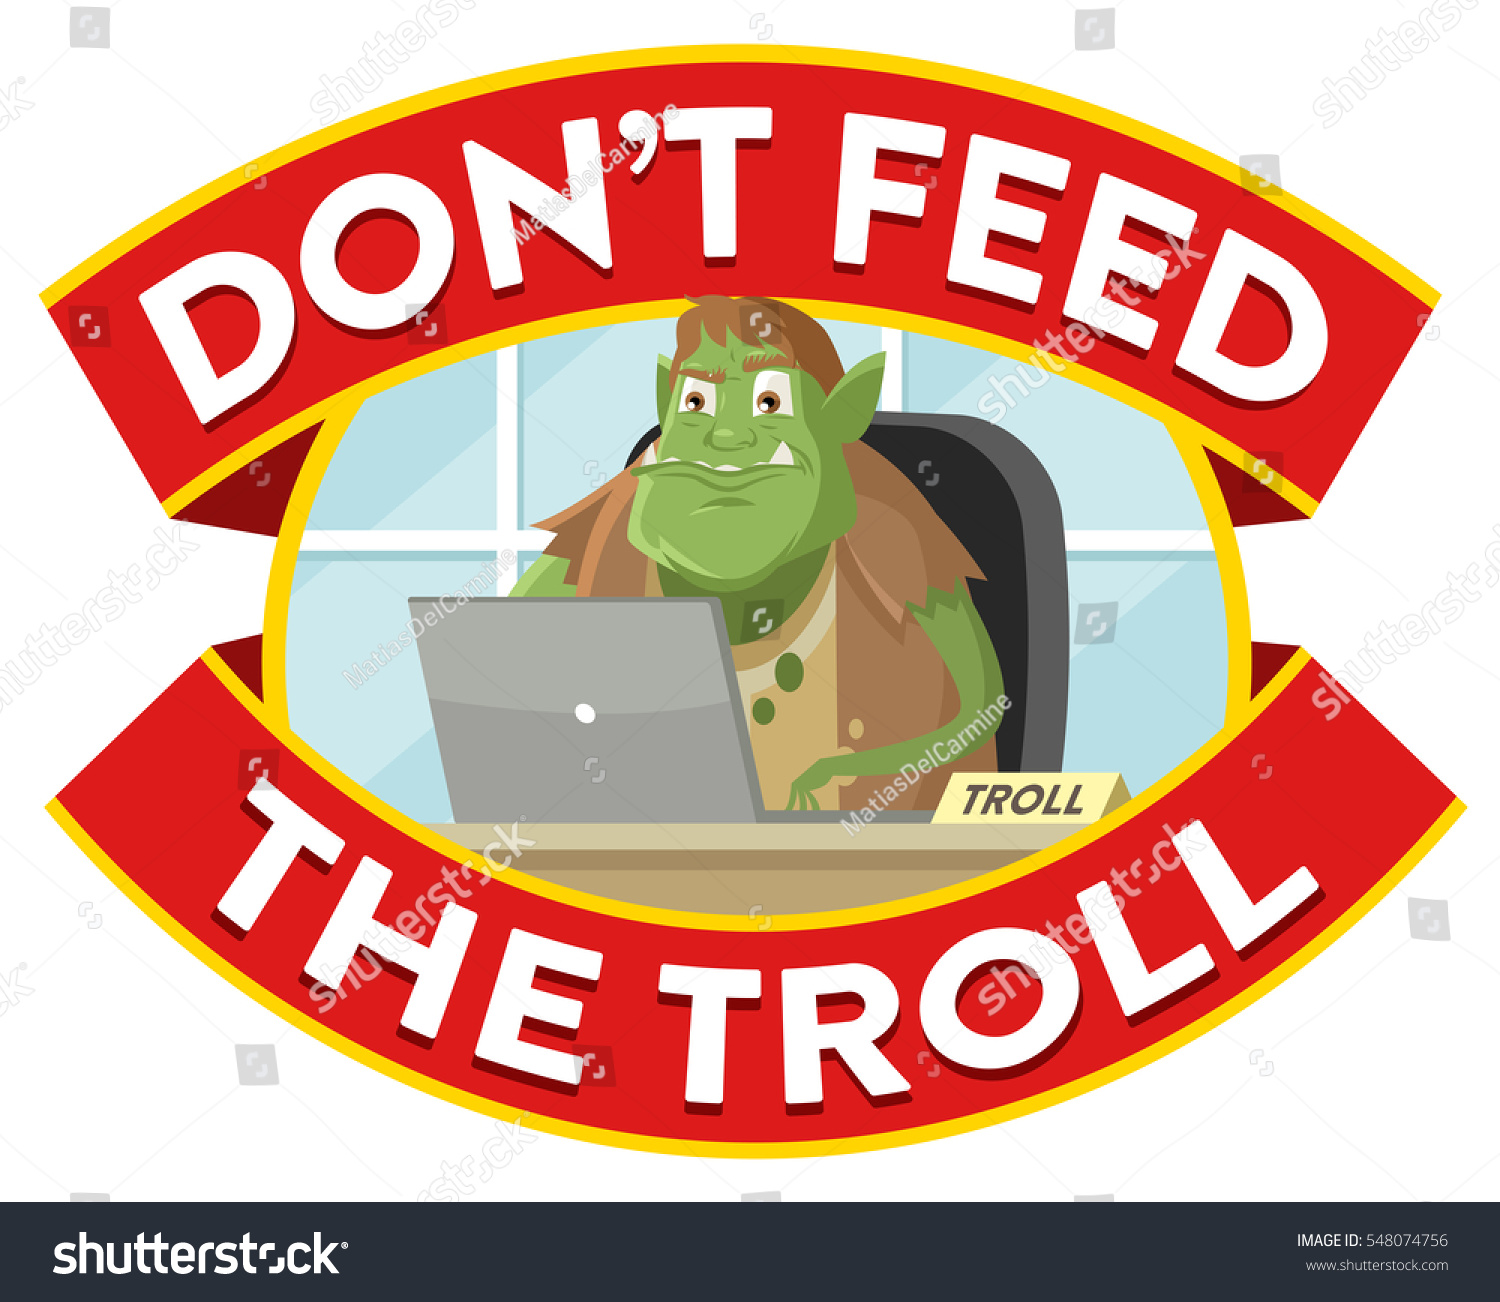 aimage.shutterstock.com_z_stock_vector_don_t_feed_the_troll_sign_548074756.jpg